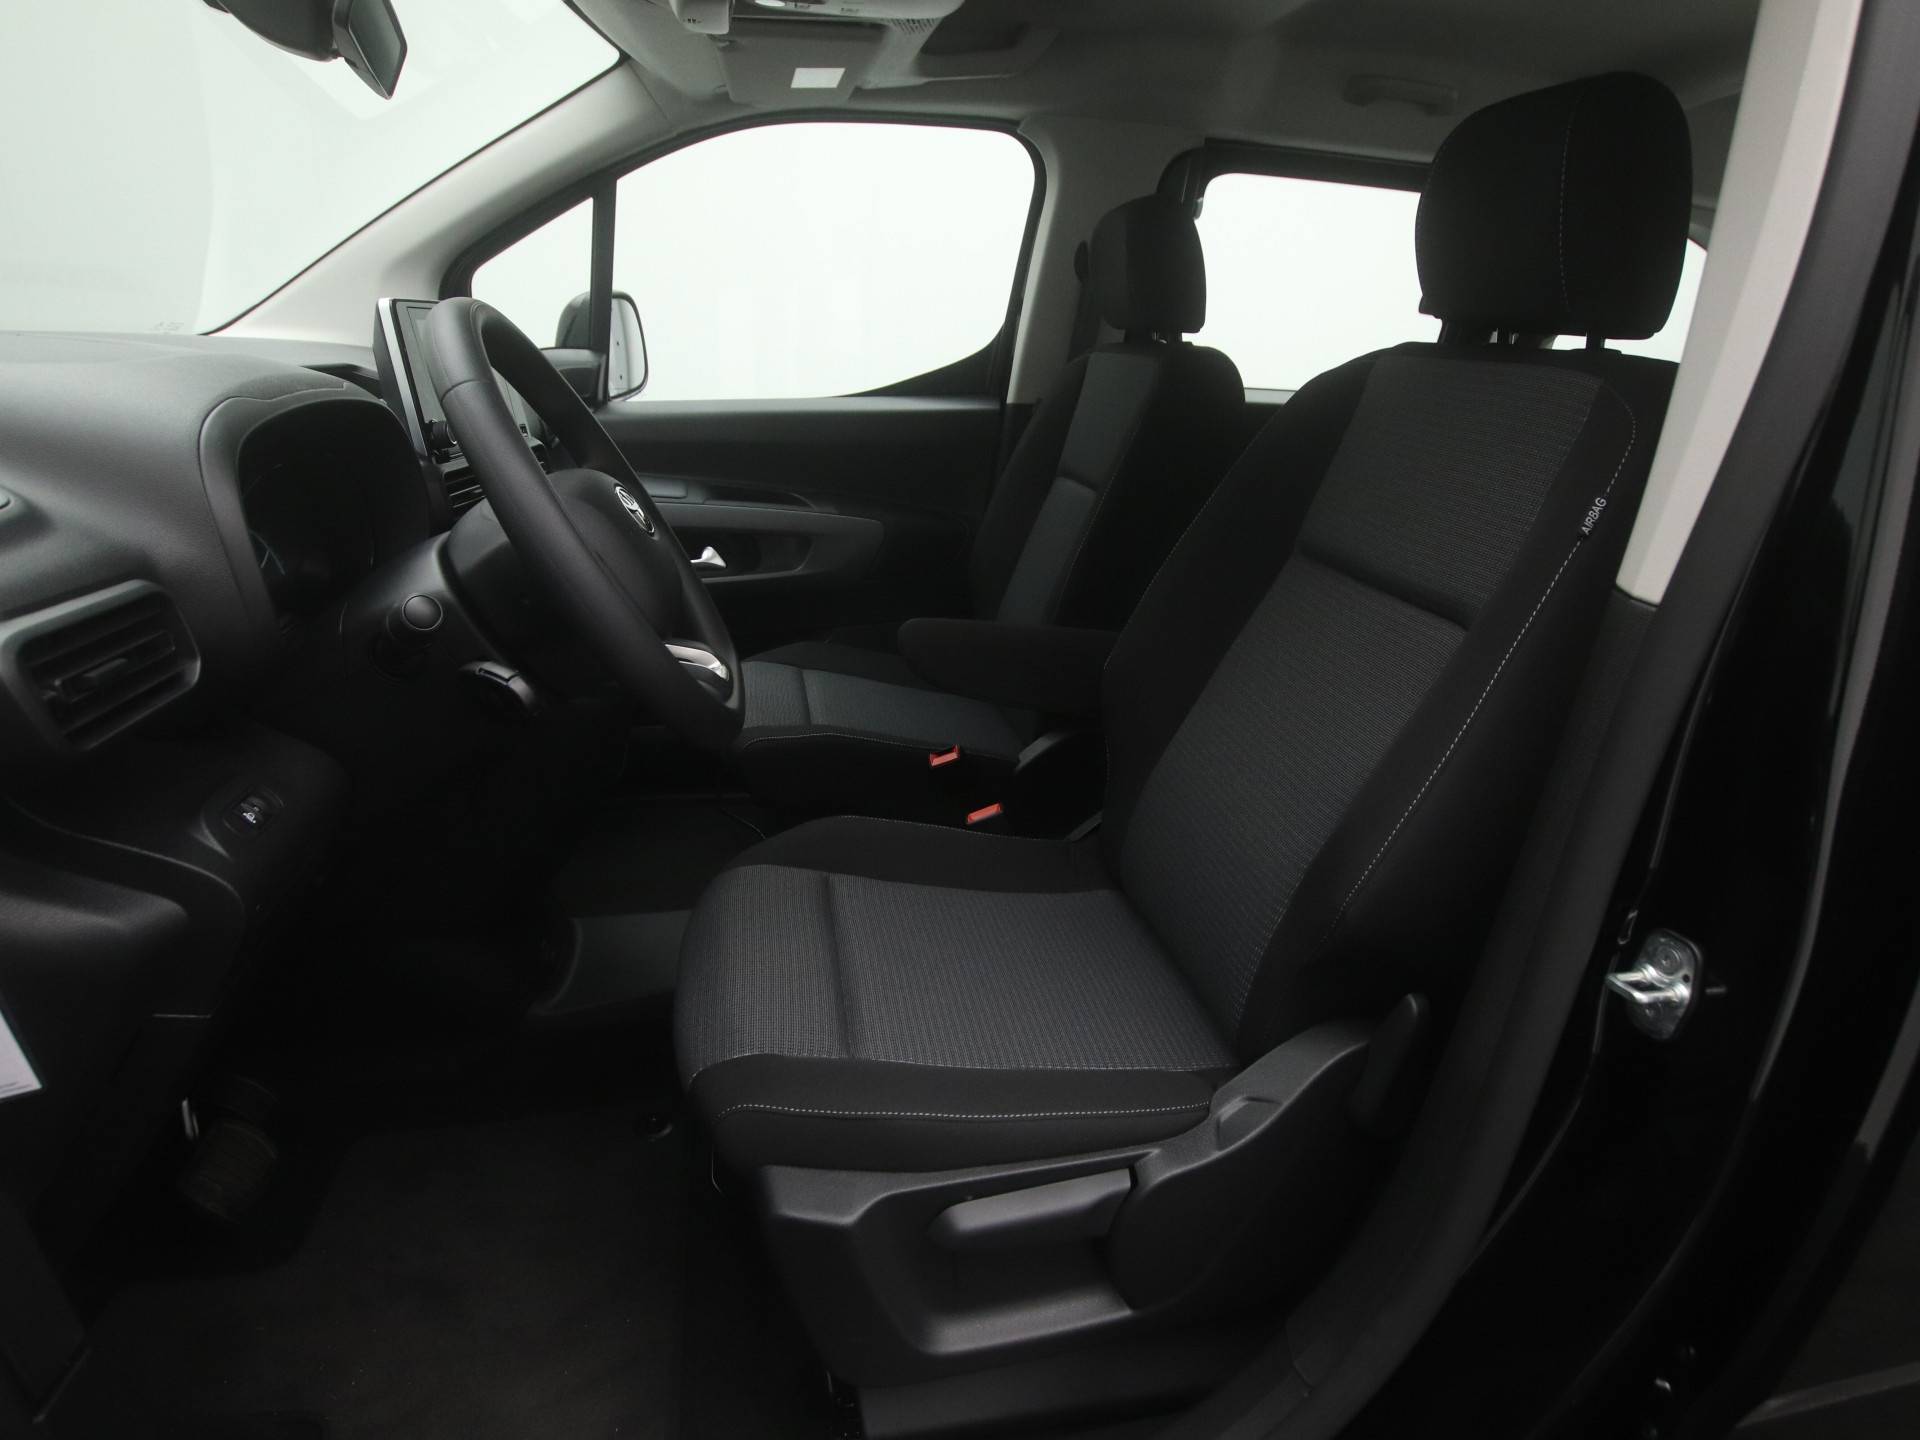 Toyota PROACE CITY Verso Electric 50kWh Live *Demo* | Navigatie | Cruise Control | Apple Carplay-Android Auto | vd zeeuw bouw - 15/39